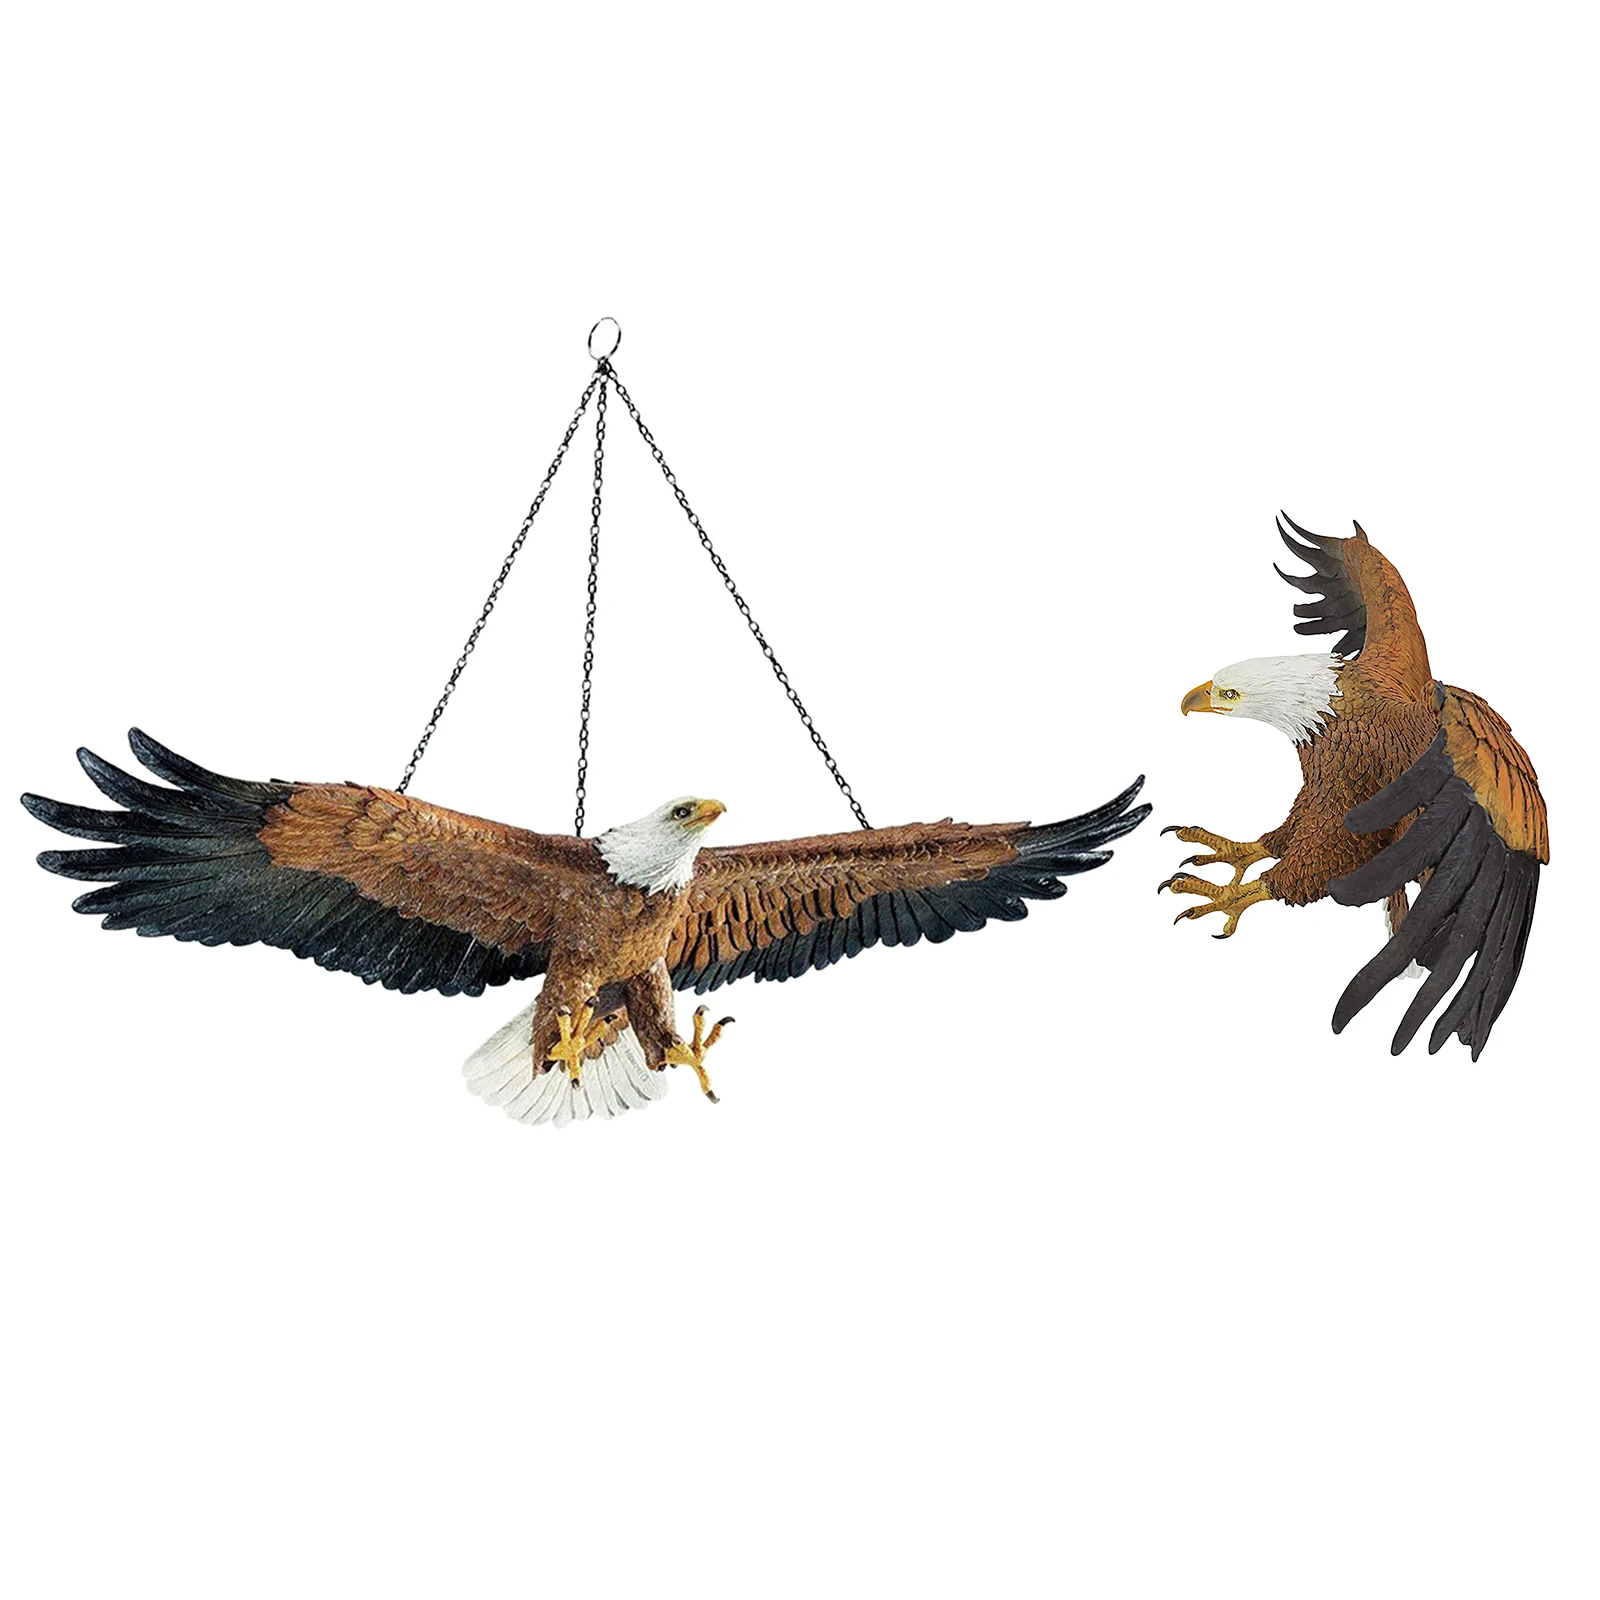 Hanging Eagle Garden Realistic Details for Any Yard Outdoor Wall Statue Art Home Decor Figurines Statue Garden Sculptures